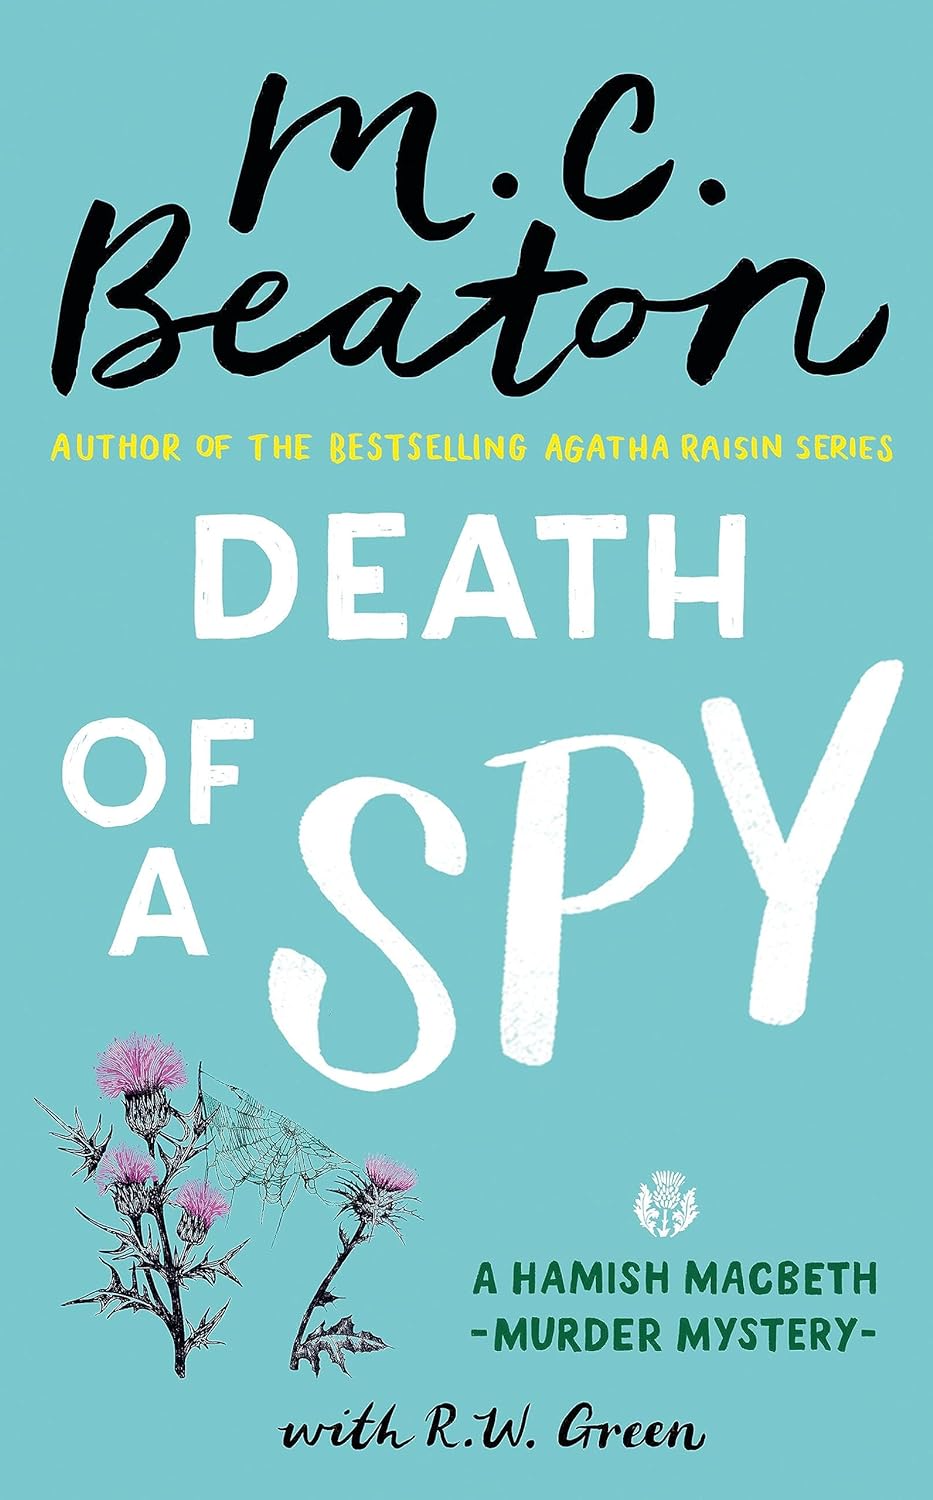 Image for "Death of a Spy"